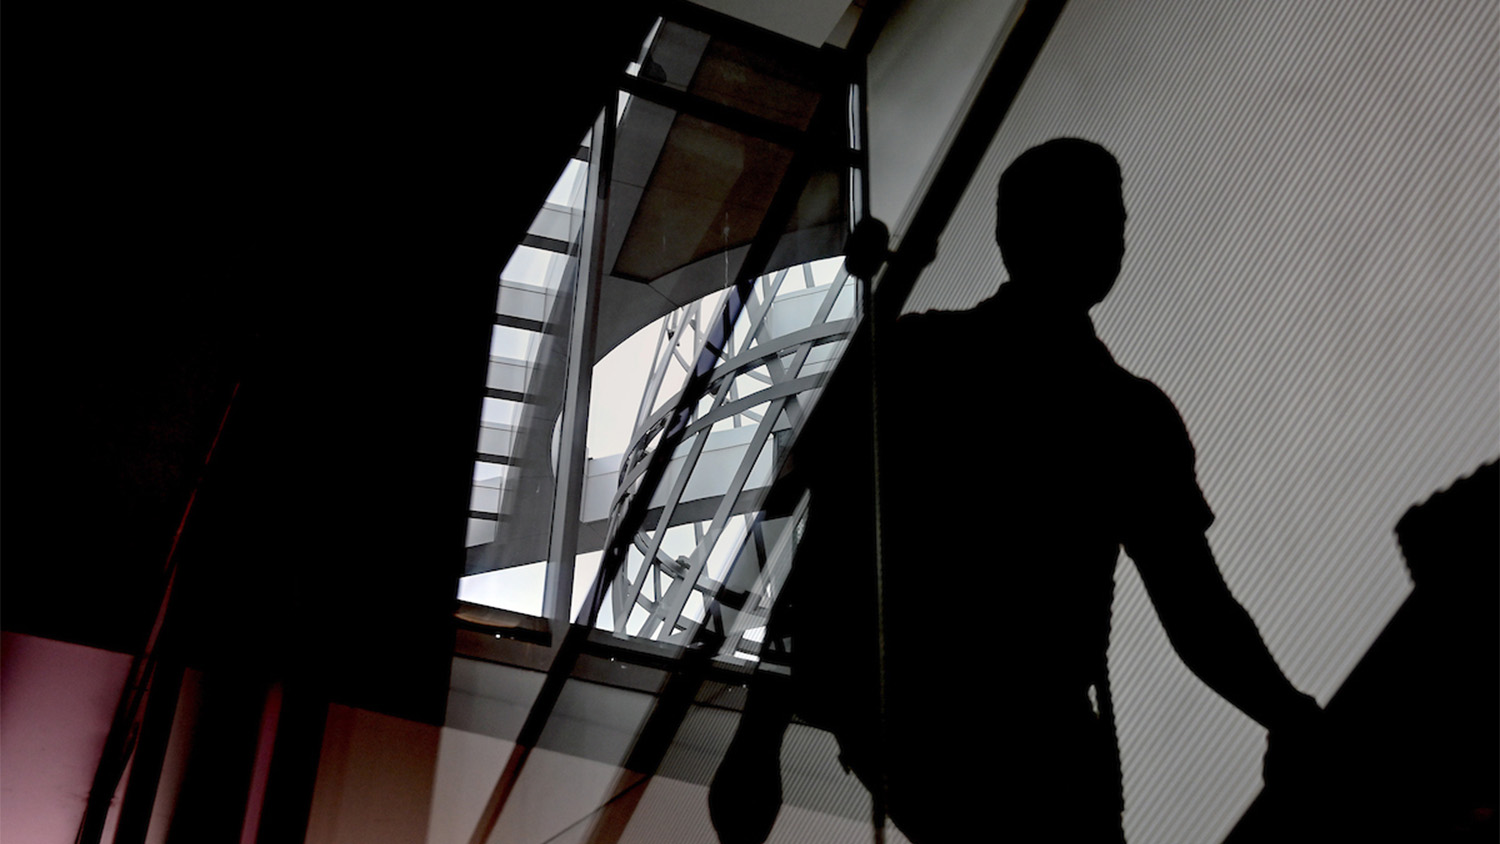 Silhouette of a student climbing stairs indoors, with the Technology Tower of Talley Student Union in the background